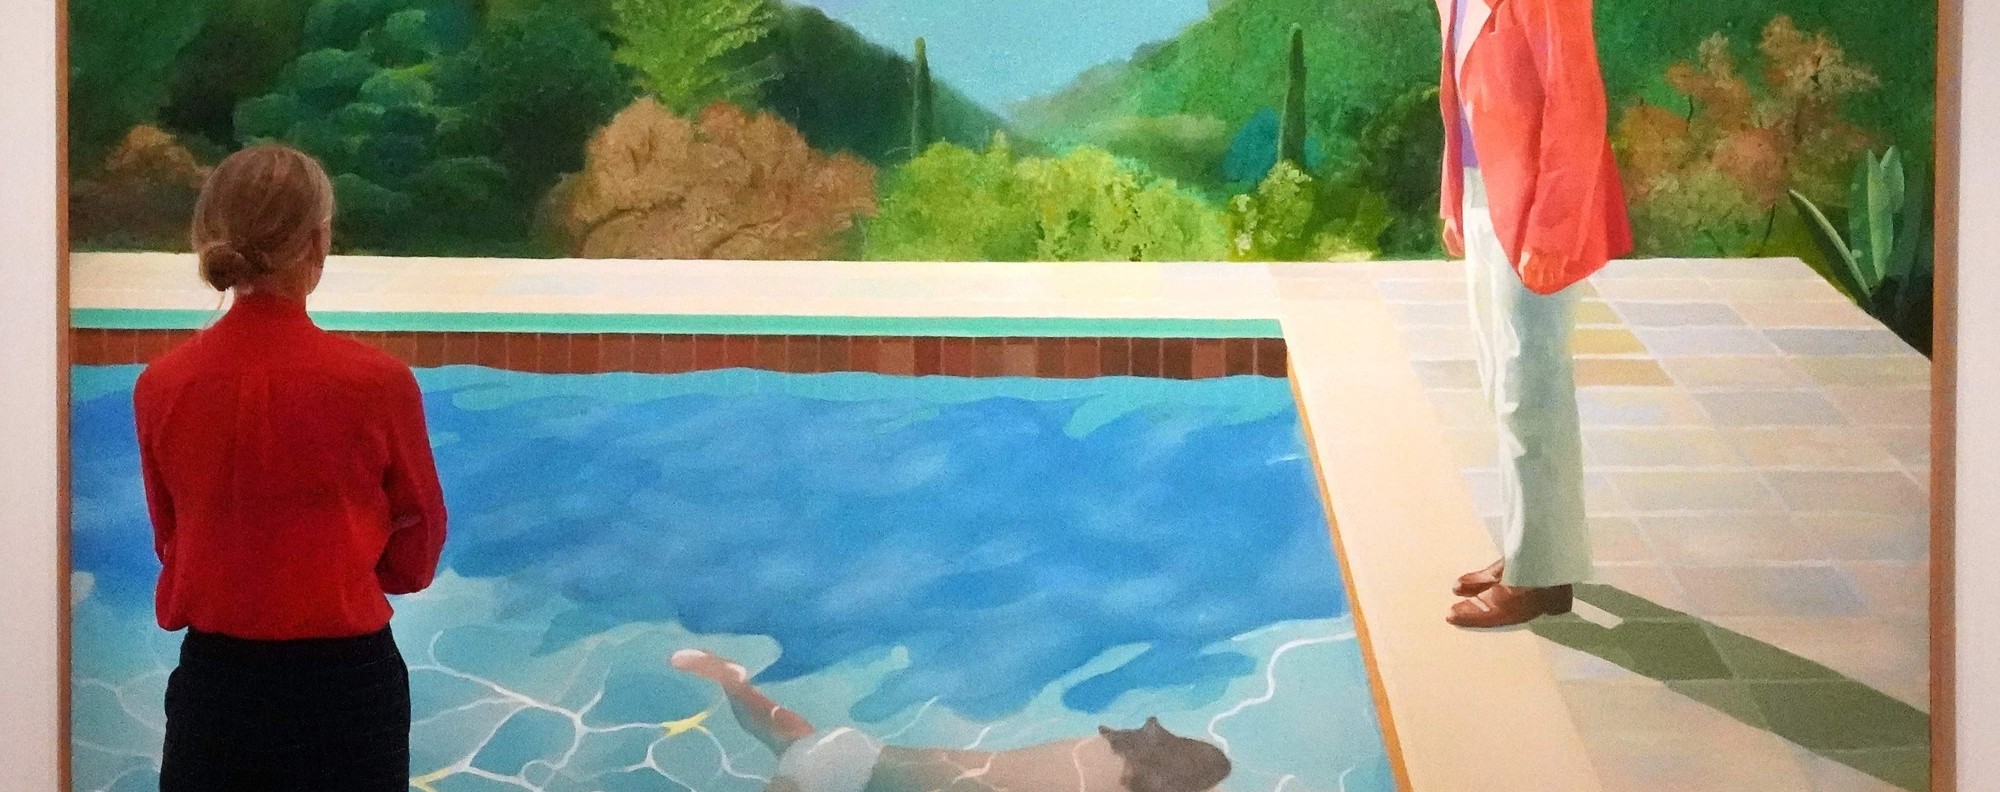 David Hockney Portrait Of An Artist (Pool With Two Figures)